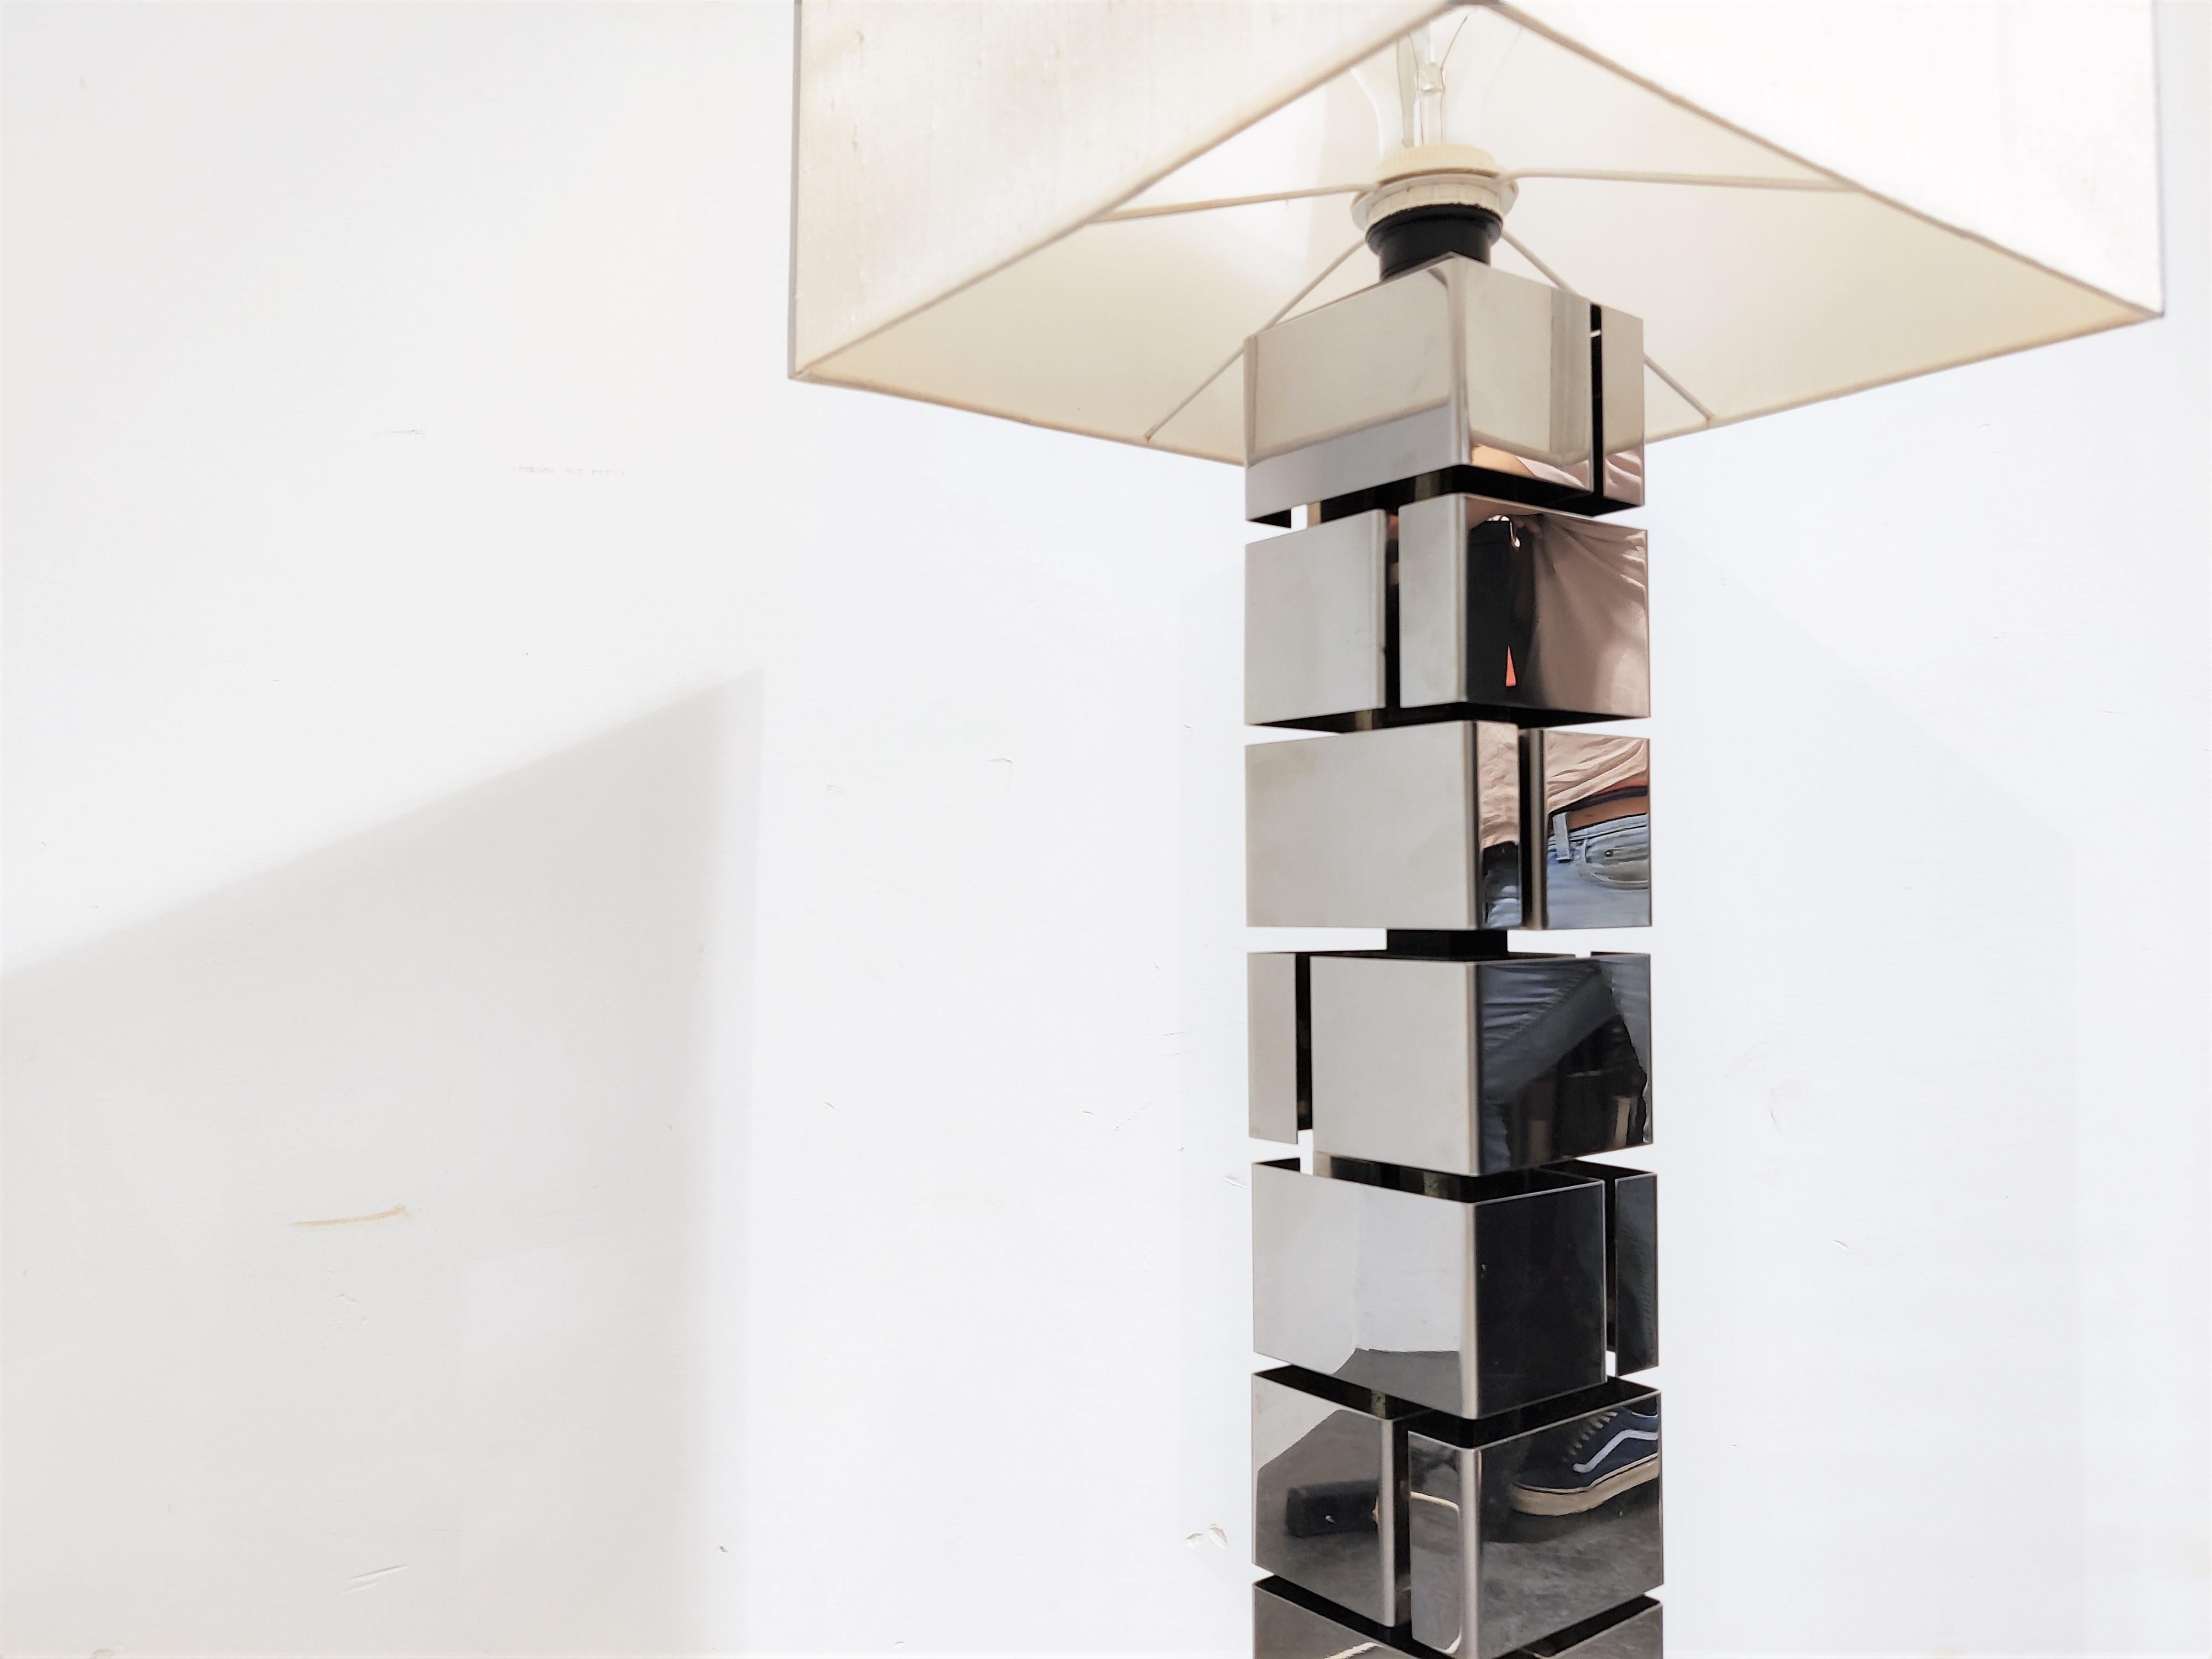 Chromed architectural floor lamp by Curtis Jere.

Sometimes confused with Max Sauze who has very similar design.

Chromed aluminum plates assembled in a nice architectural way. 

The lamp makes us think of large skyscrapers.

Comes with the